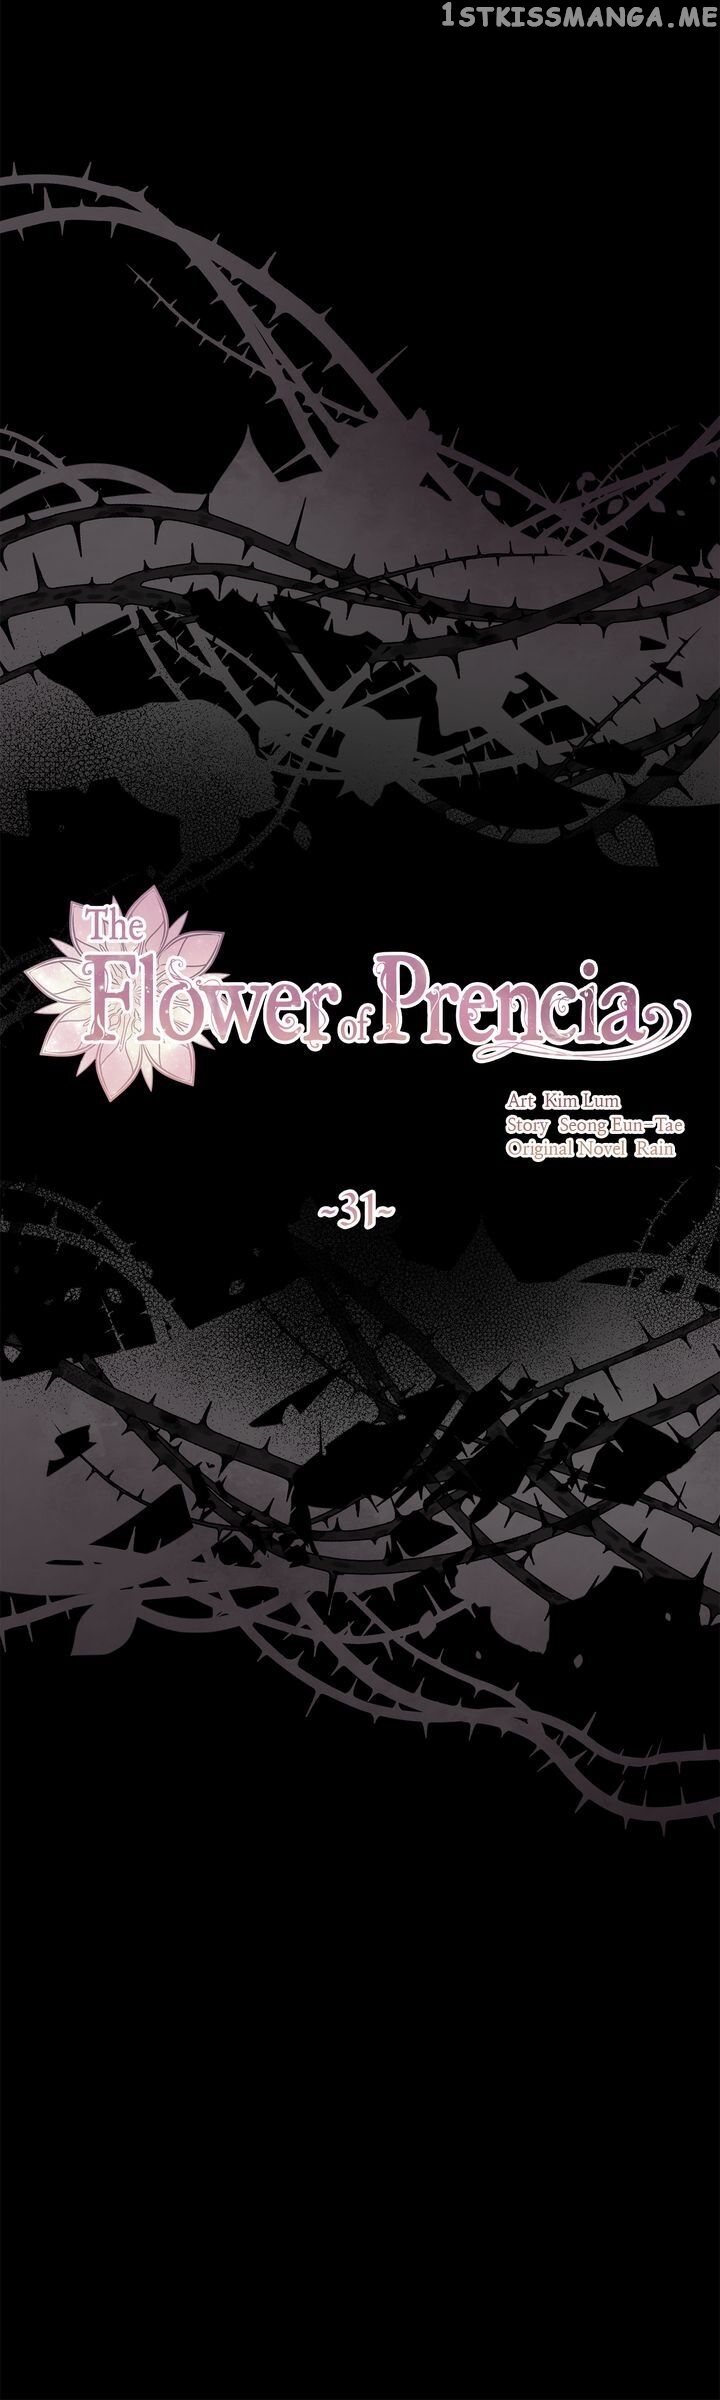 The Flower of Francia chapter 31 - page 1